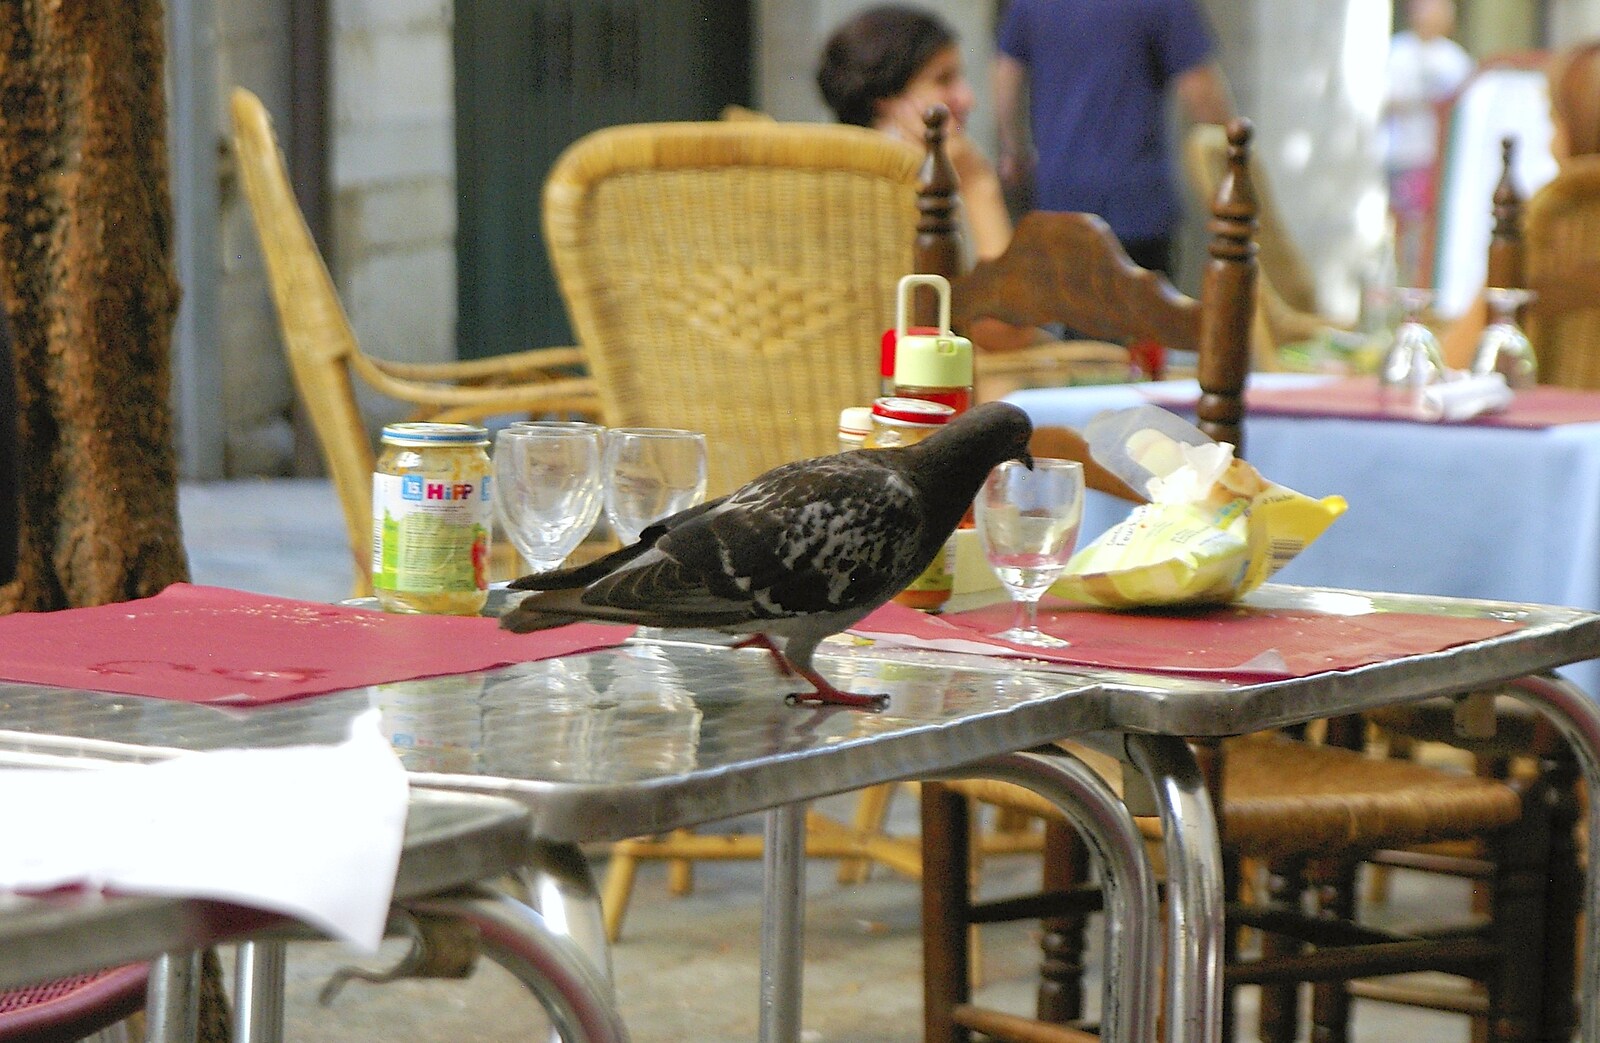 A pigeon does what pigeons do: scrounge for food from Girona, Catalunya, Spain - 17th September 2006